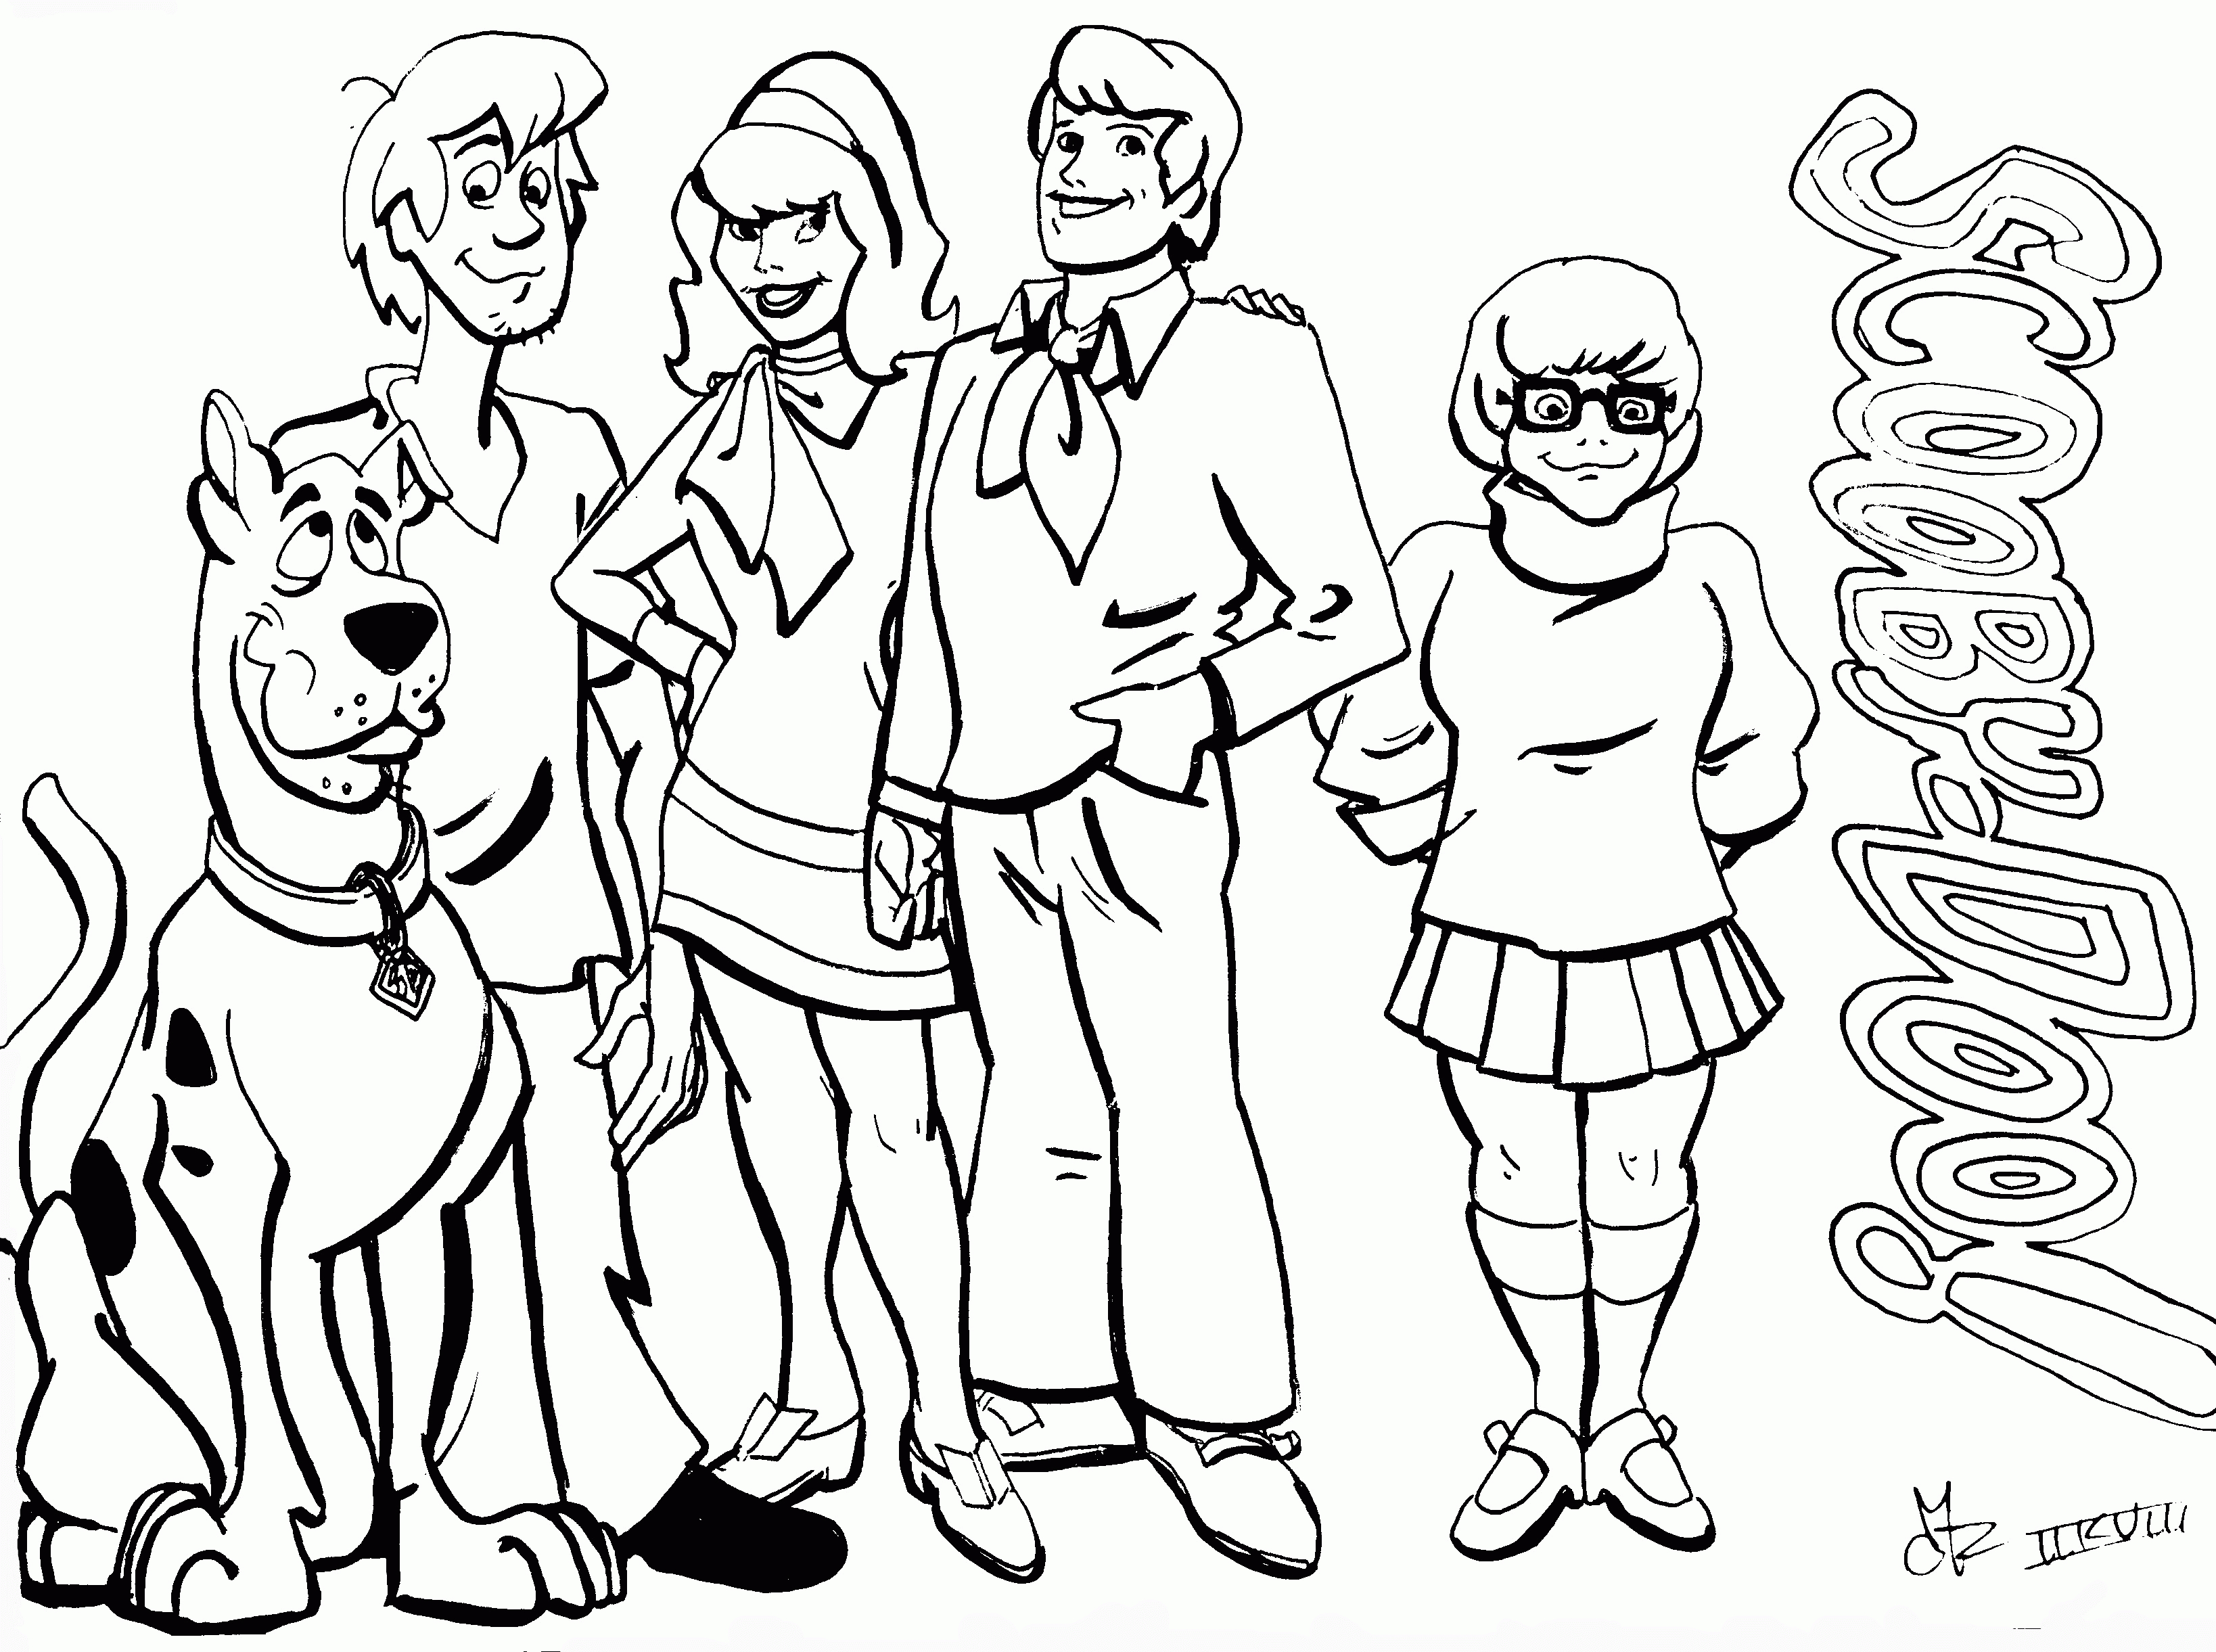 Scooby Doo Coloring Book Pages - Coloring Pages For Kids And For - Free Printable Coloring Pages Scooby Doo